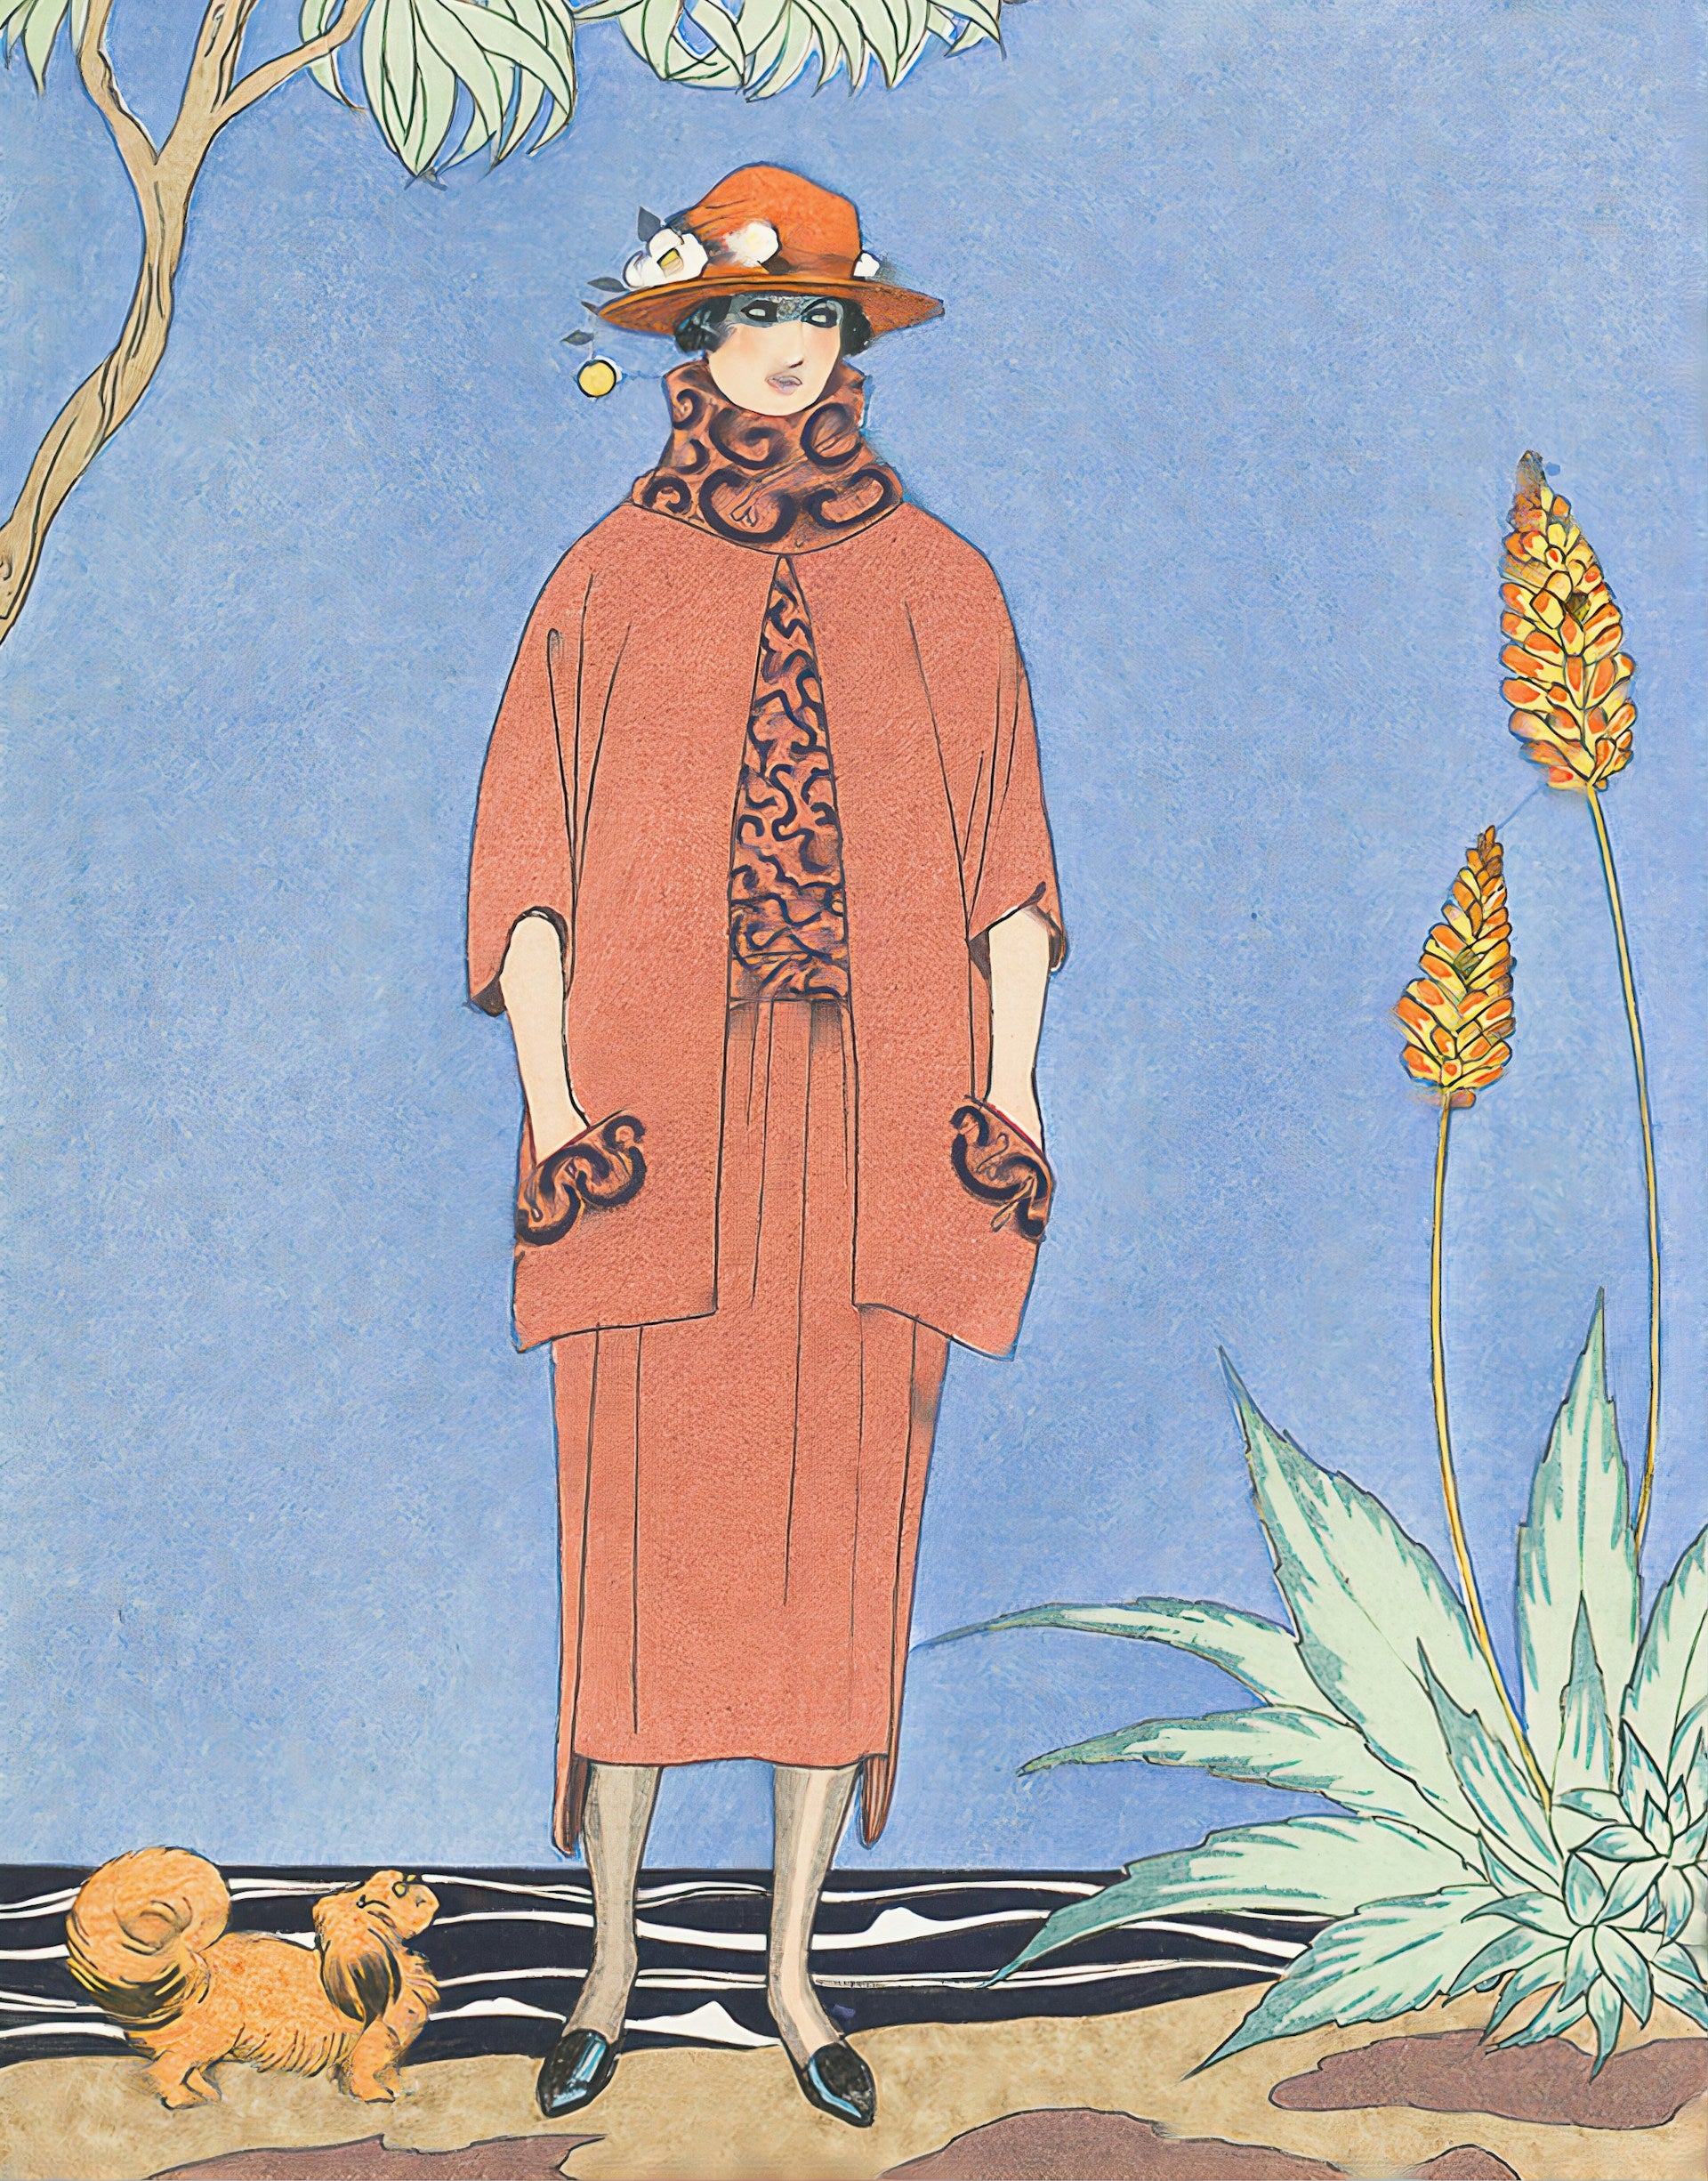 Artwork of a person in a red outfit and hat standing on a beach.